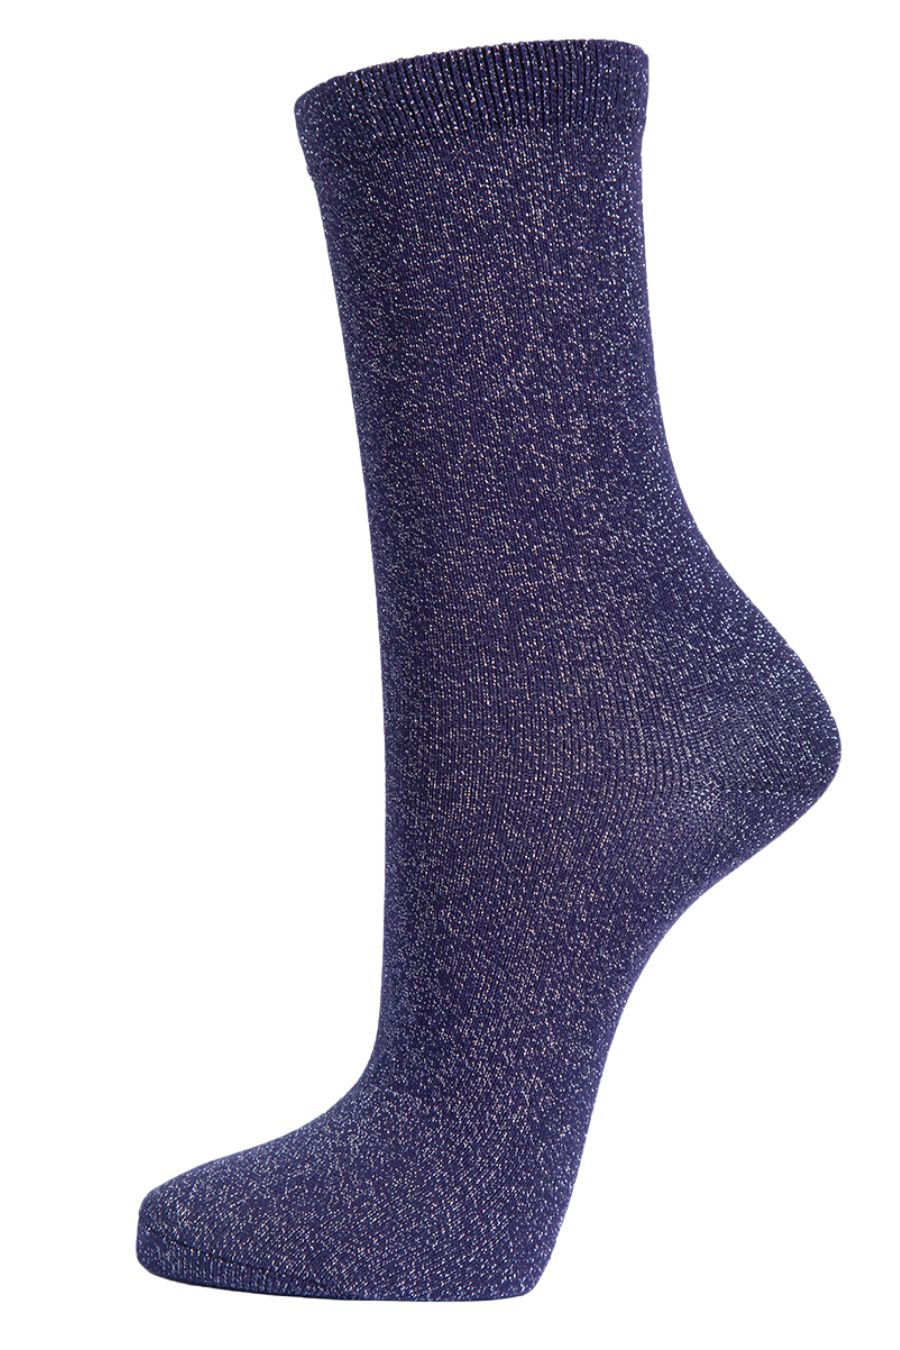 navy blue ankle socks with all over silver glitter shimmer